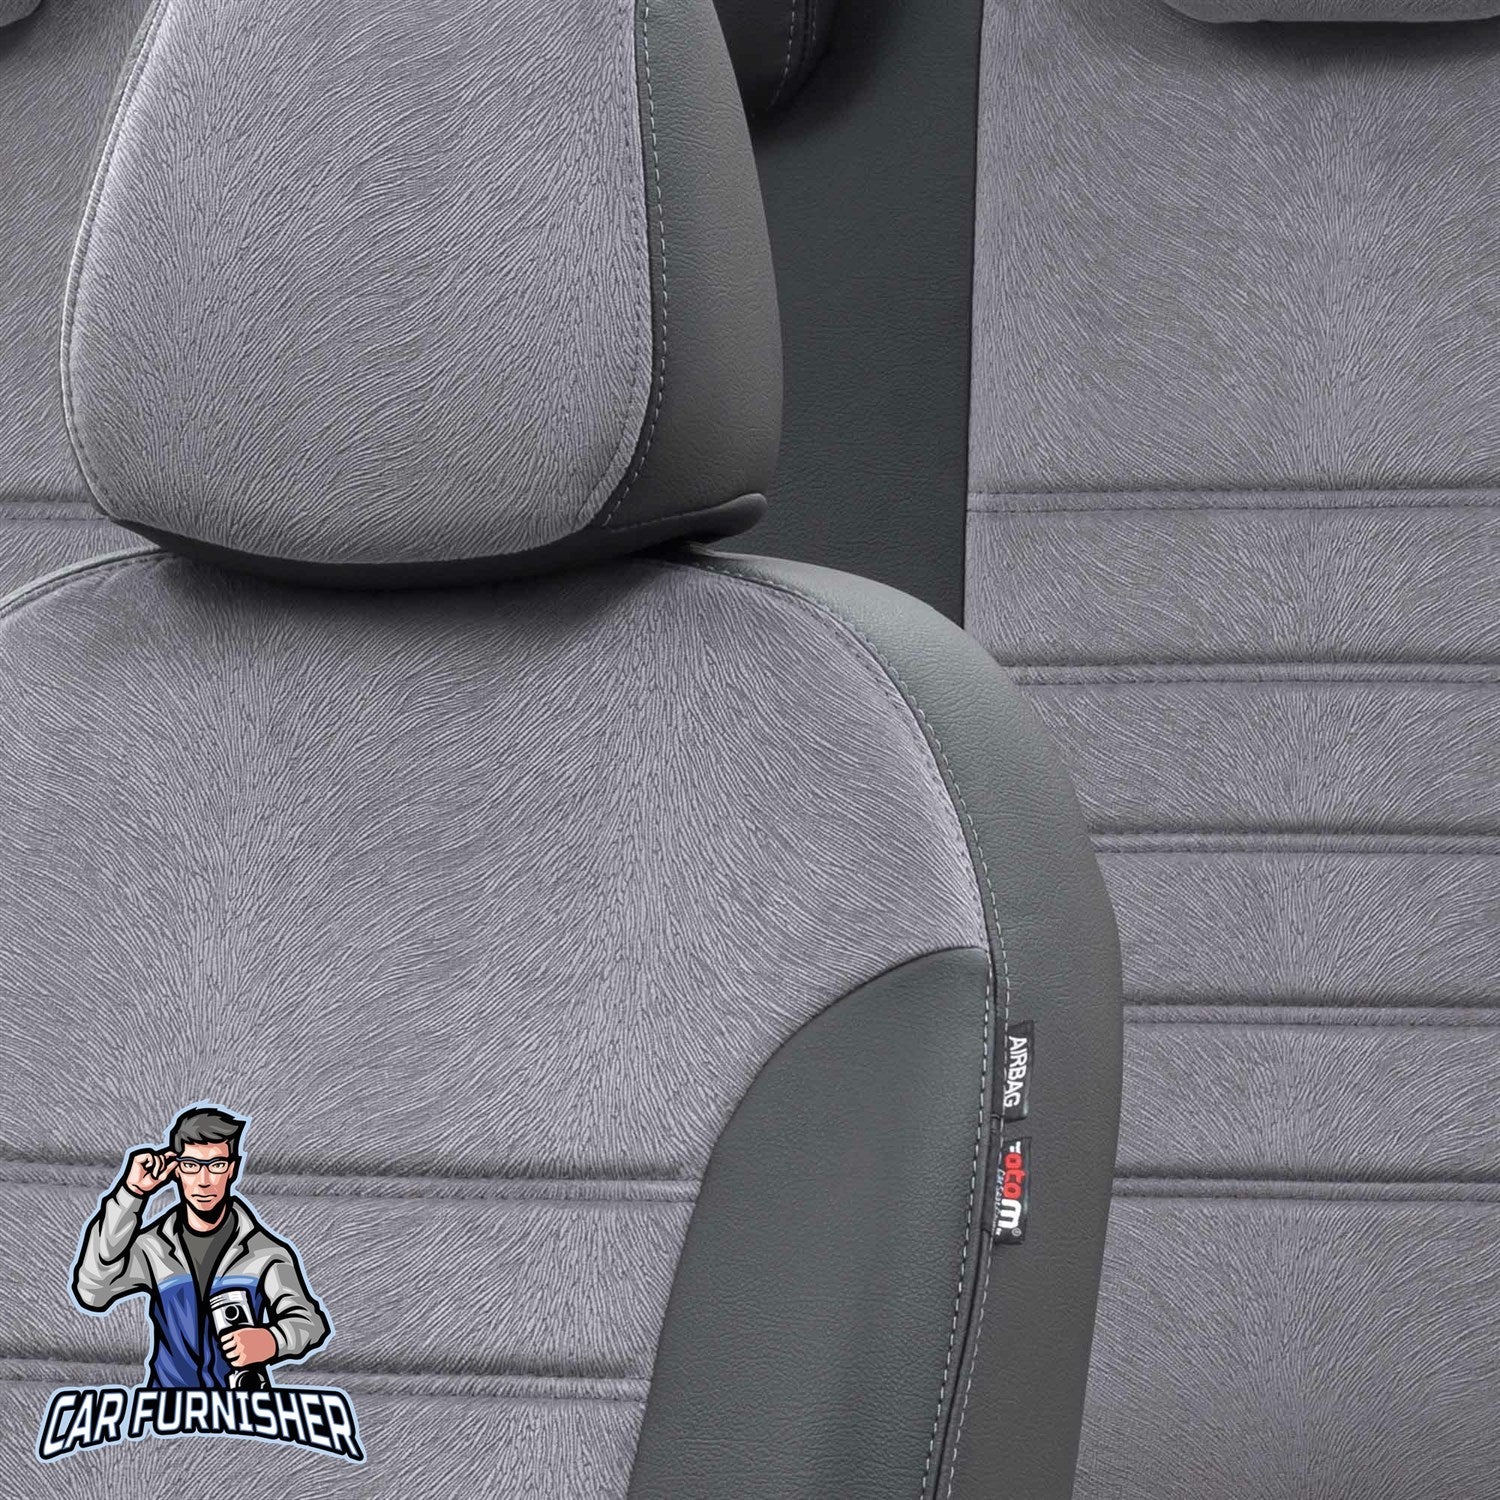 Volvo S80 Car Seat Cover 2006-2016 D3/D4/D5/T6 London Design Smoked Black Full Set (5 Seats + Handrest) Leather & Fabric